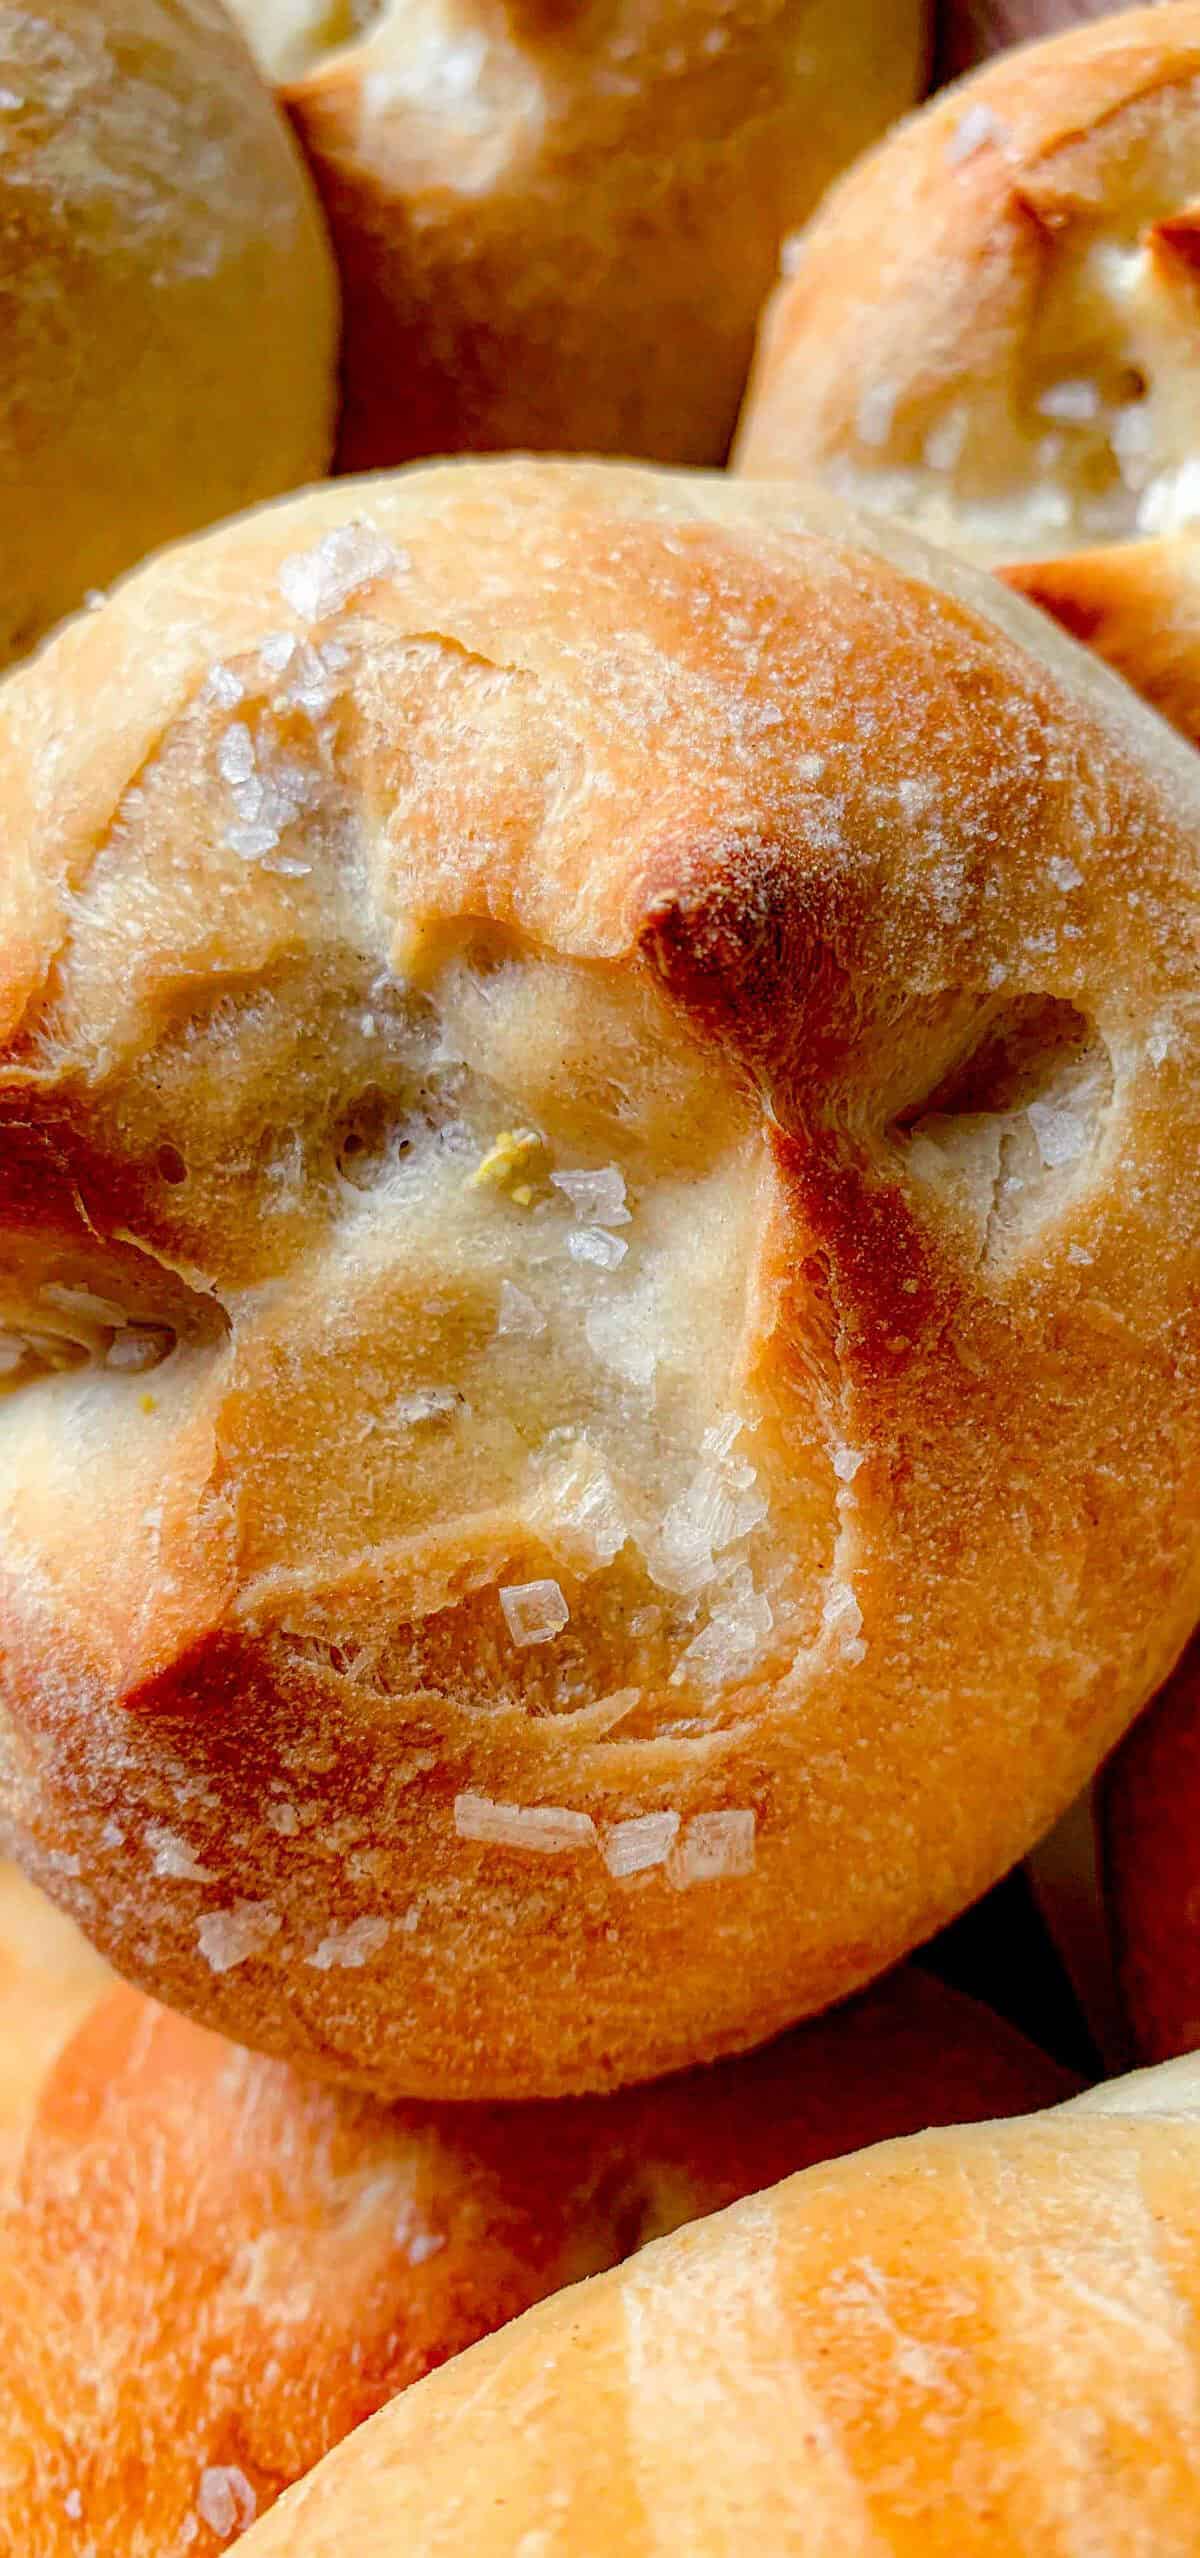  Do you see those air pockets that have formed in the bread? That's the sign of a well-made dough.